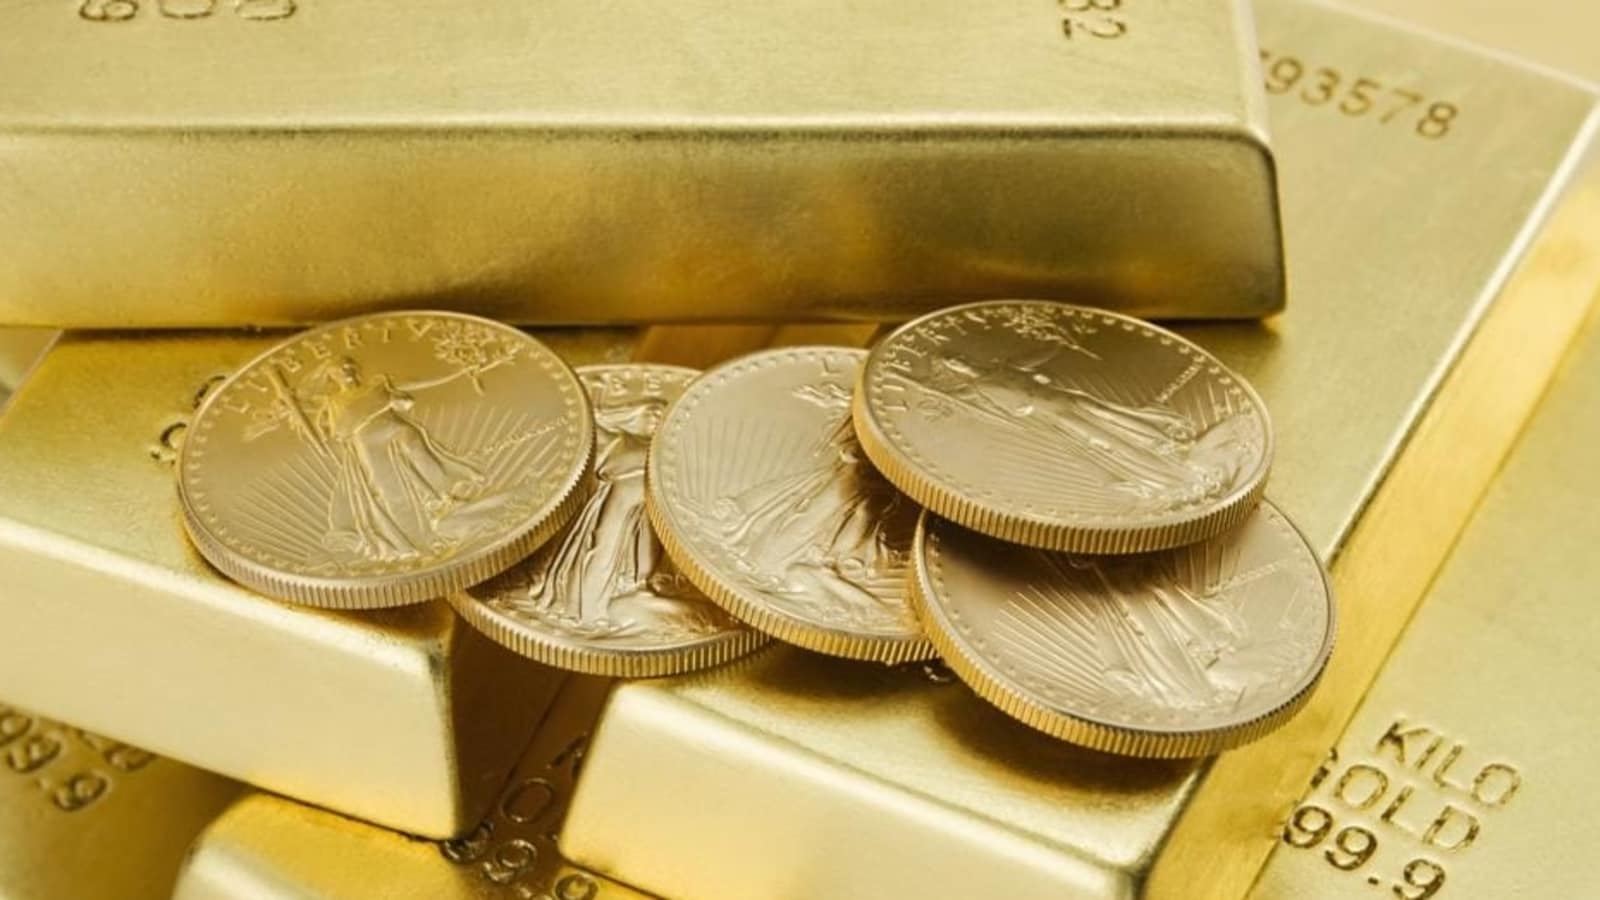 sovereign gold bond scheme opens today. check details here - hindustan times